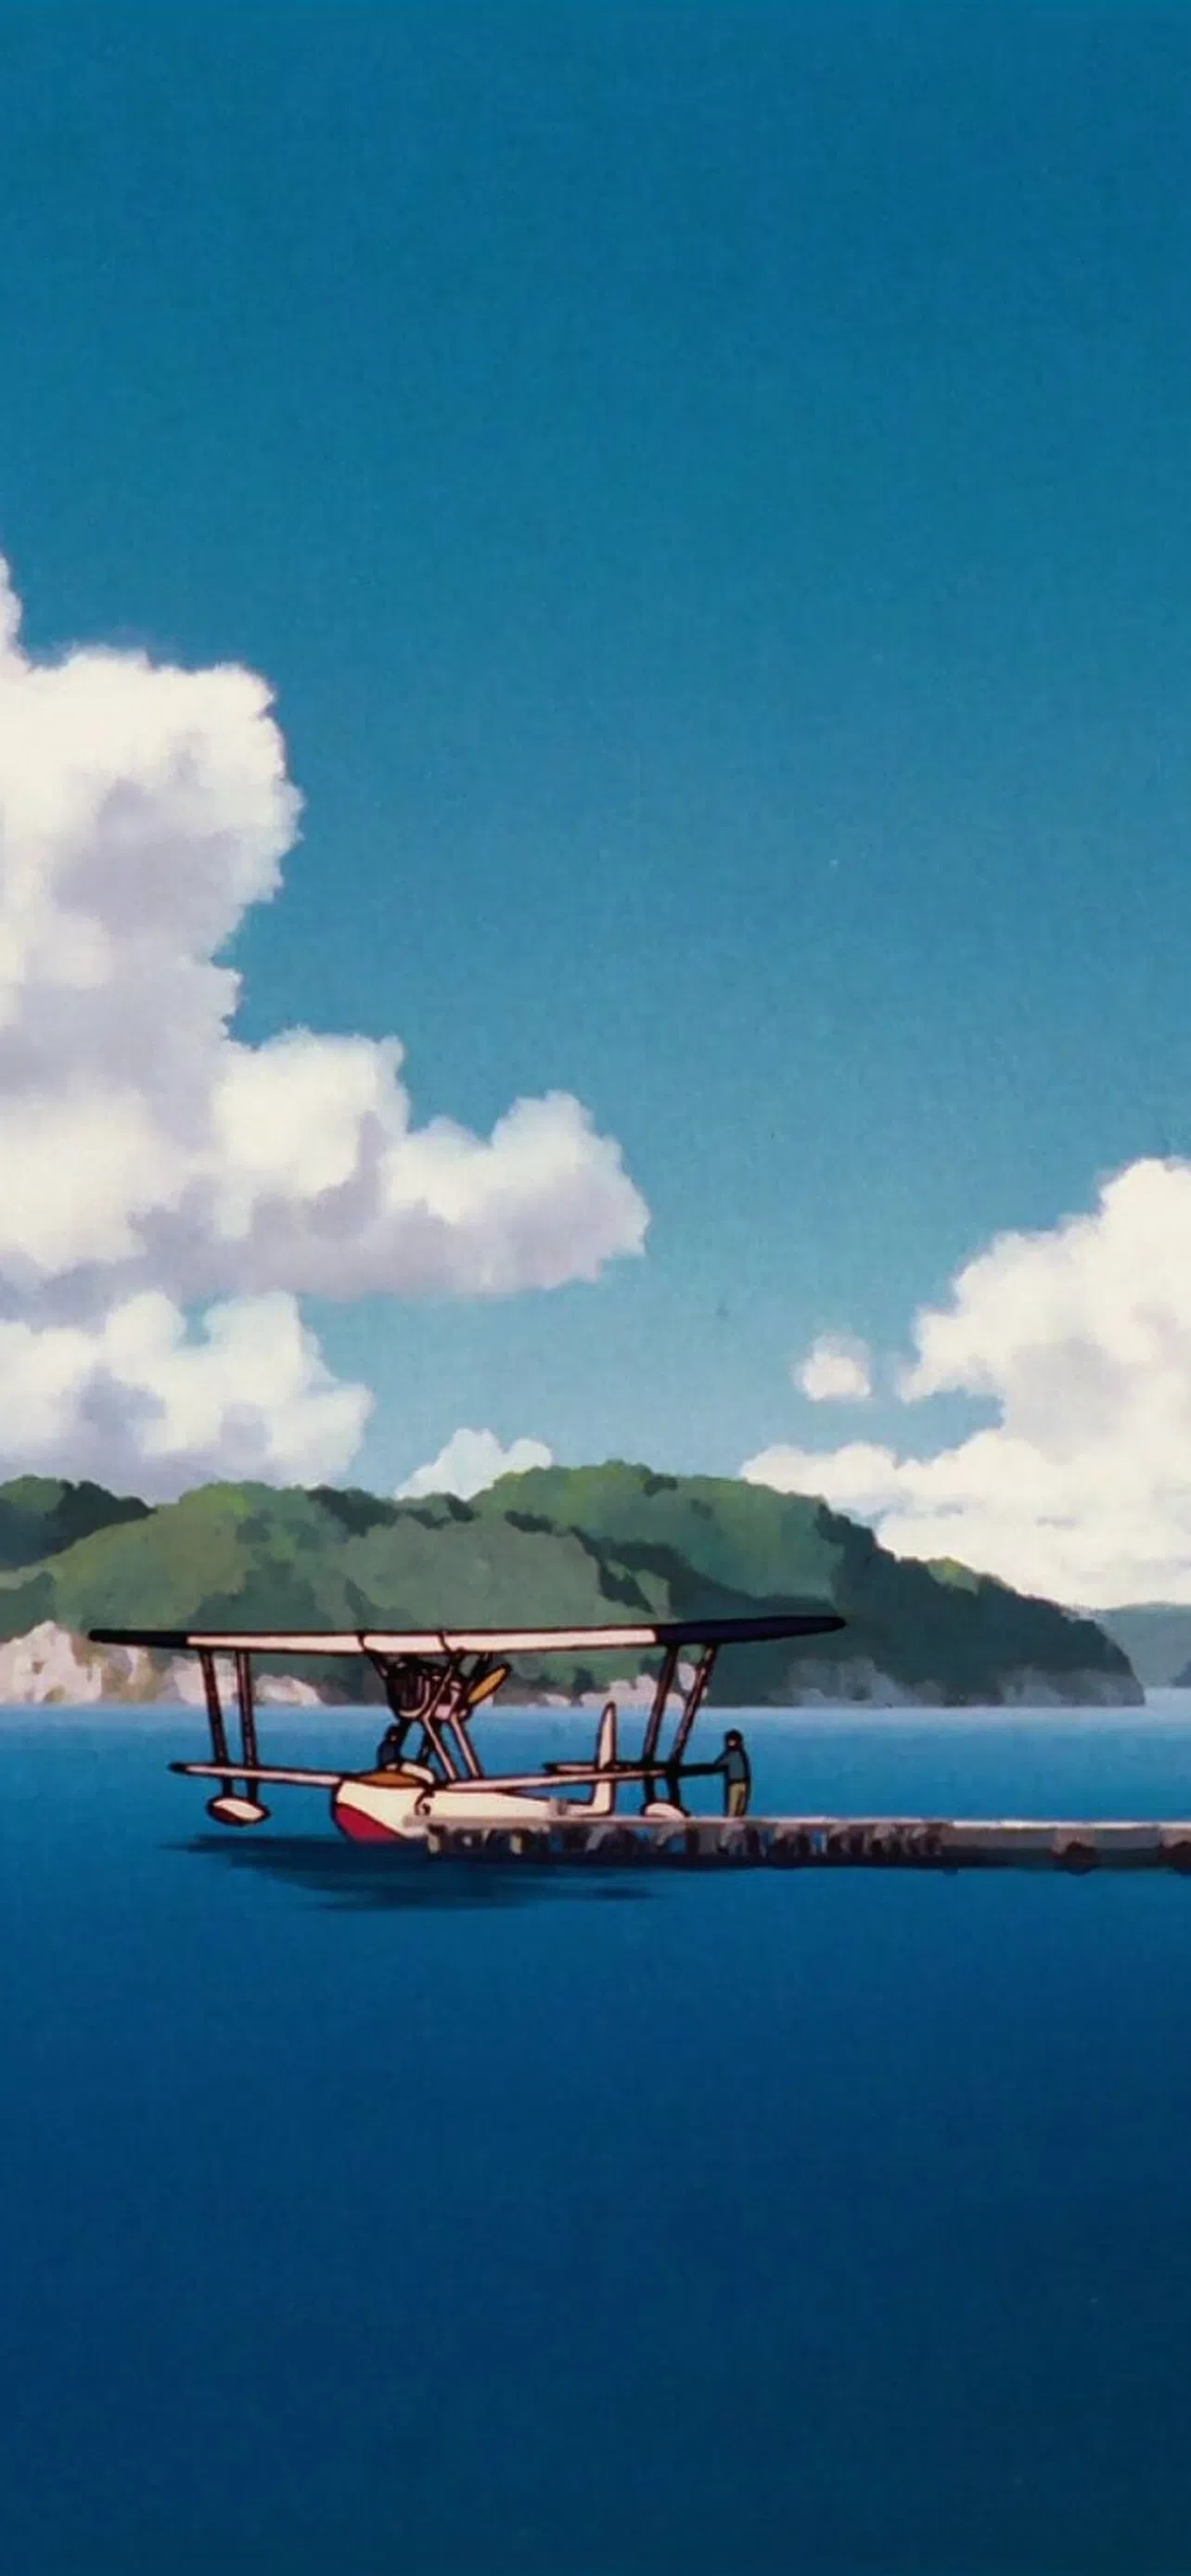 Wallpaper the sky clouds flight the plane the evening porco rosso by  hayao miyazaki images for desktop section сёнэн  download